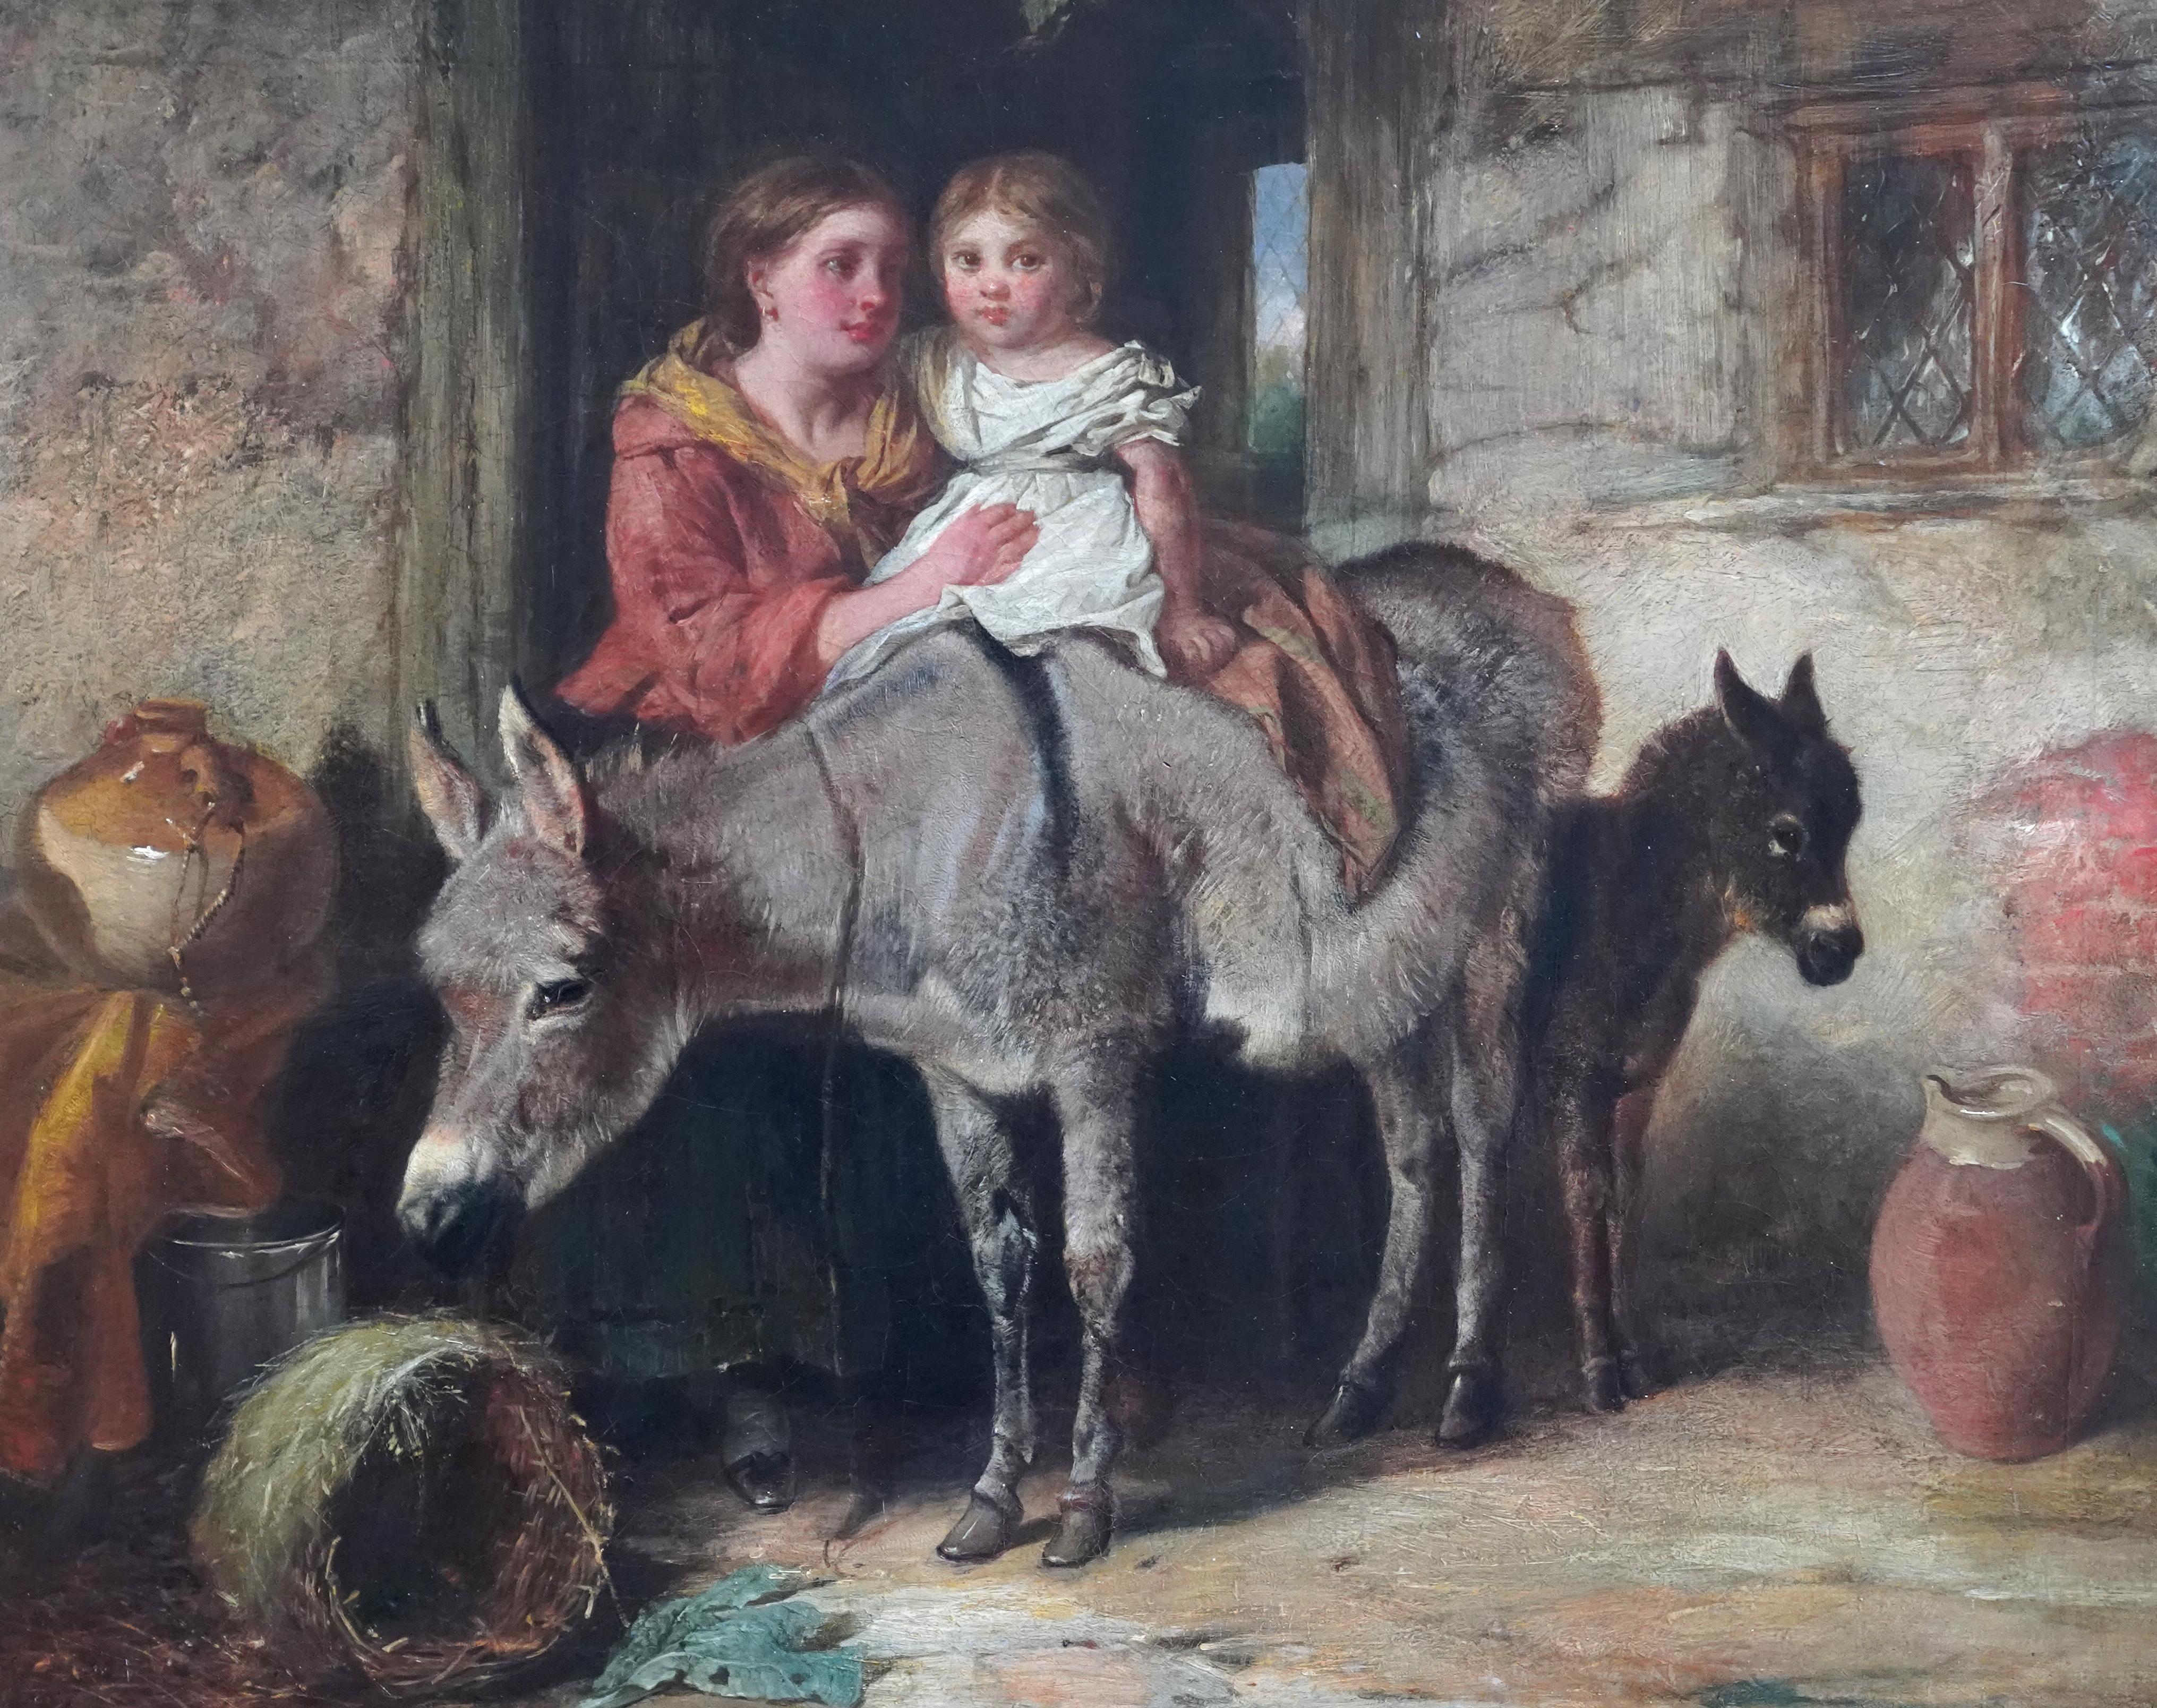 Portrait of Mother, Child and Donkey - British 19th century genre oil painting - Victorian Painting by Isaac Henzell